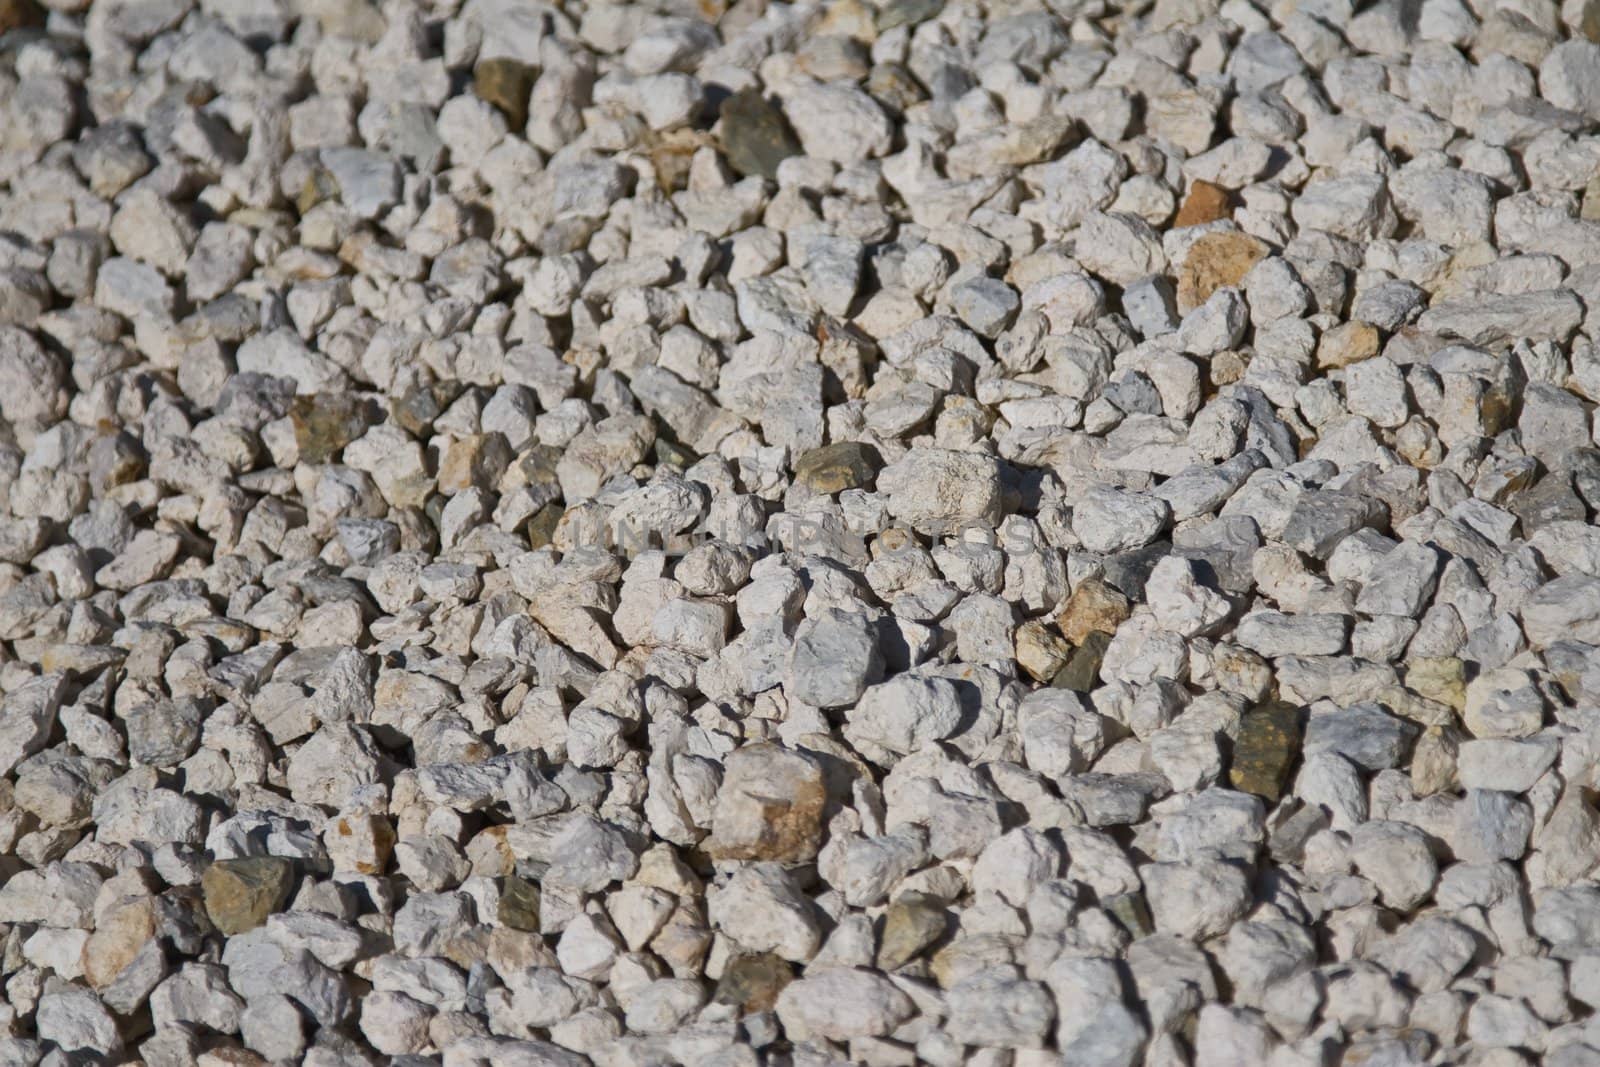 Ground covering of small rocks in different shades